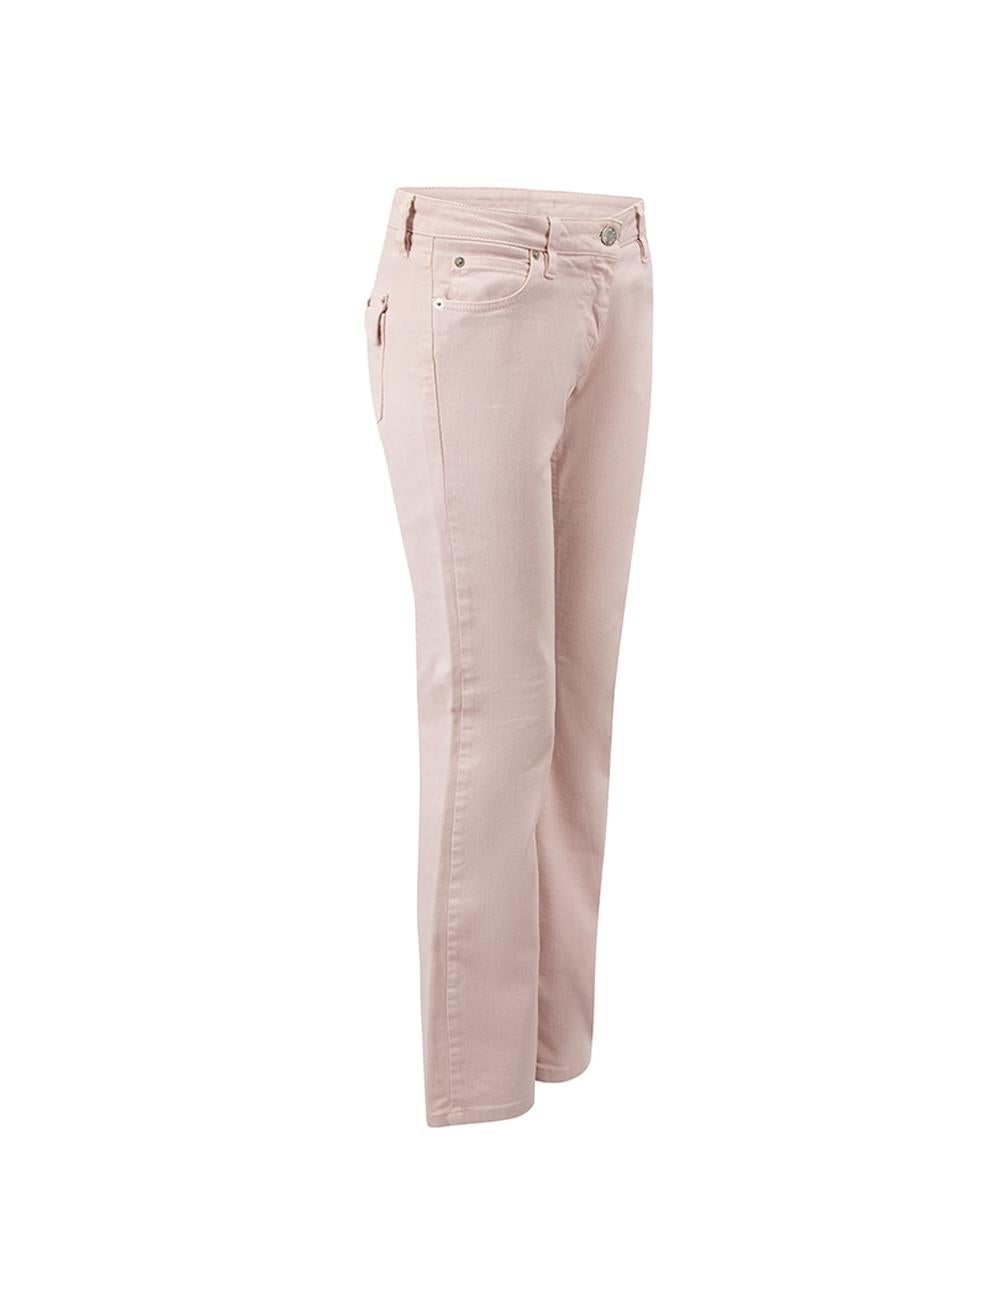 CONDITION is Very good. Minimal wear to jeans is evident. Minimal wear to the denim fabric at the hemline which is discoloured and has some stains on this used Roberto Cavalli designer resale item.



Details


Pink

Denim

Straight